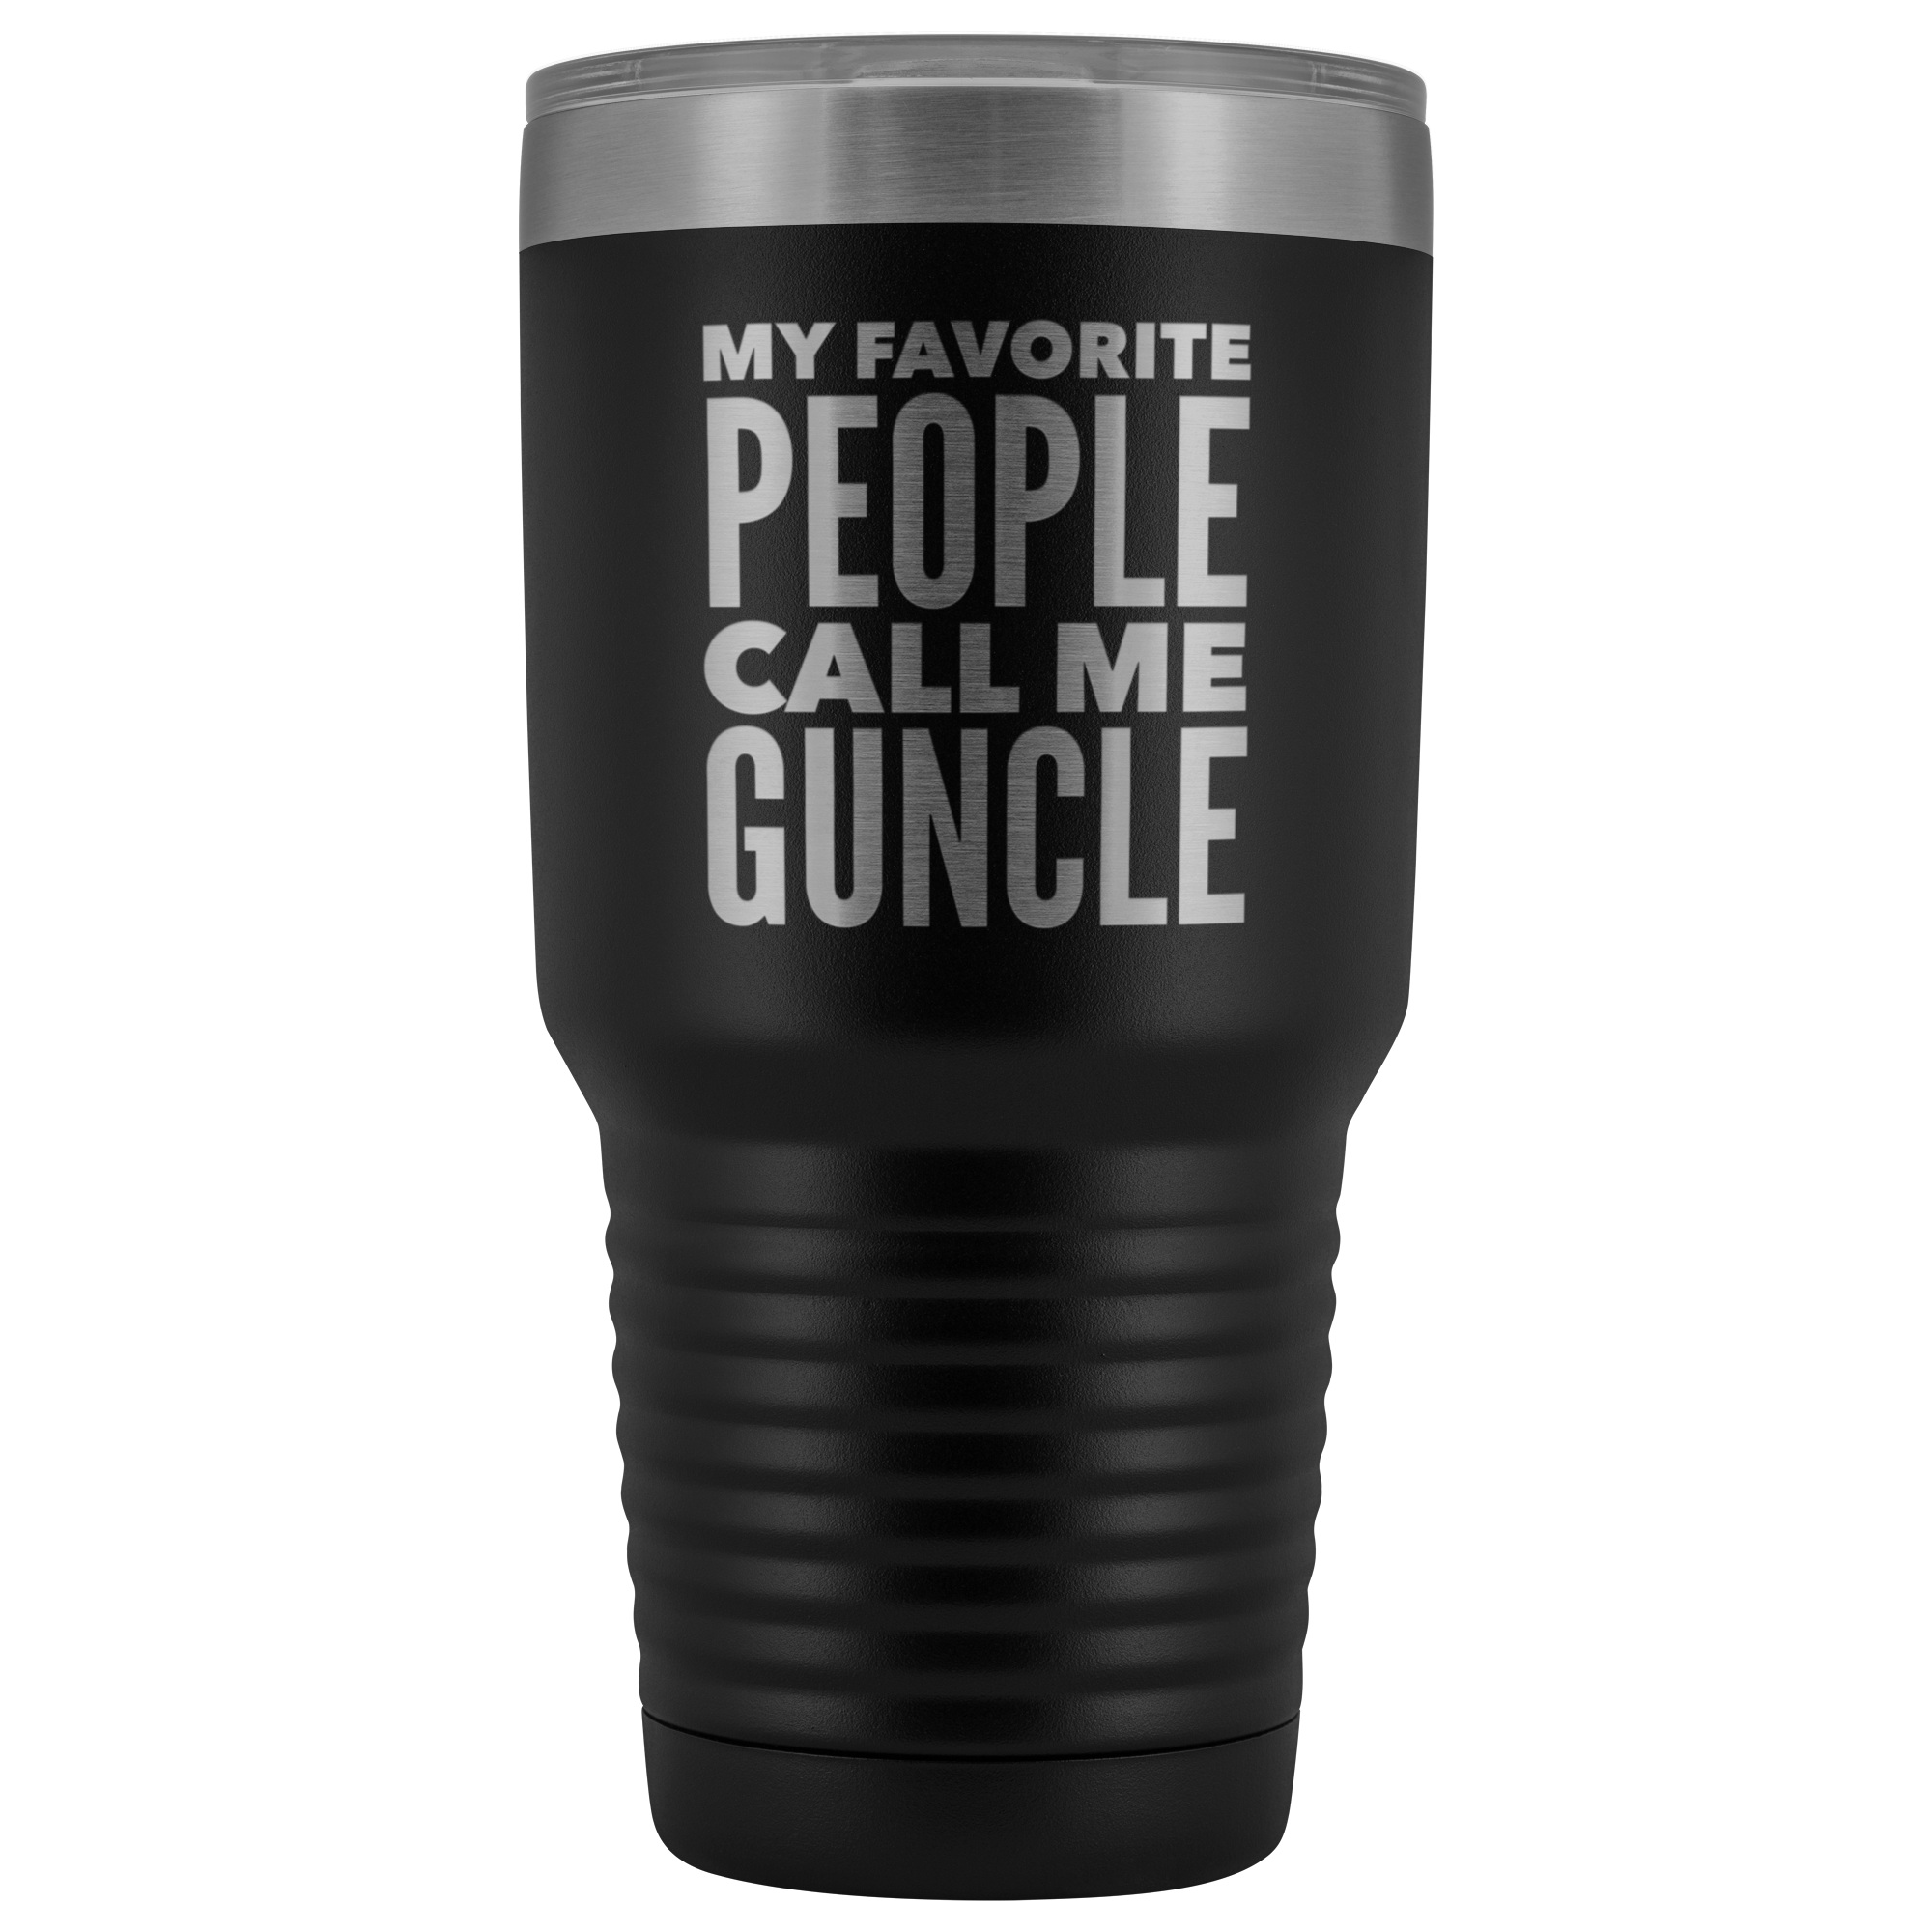 Guncle Gifts My Favorite People Call Me Guncle Tumbler Funny Metal Mug Double Wall Insulated Hot Cold Travel Cup 30oz BPA Free